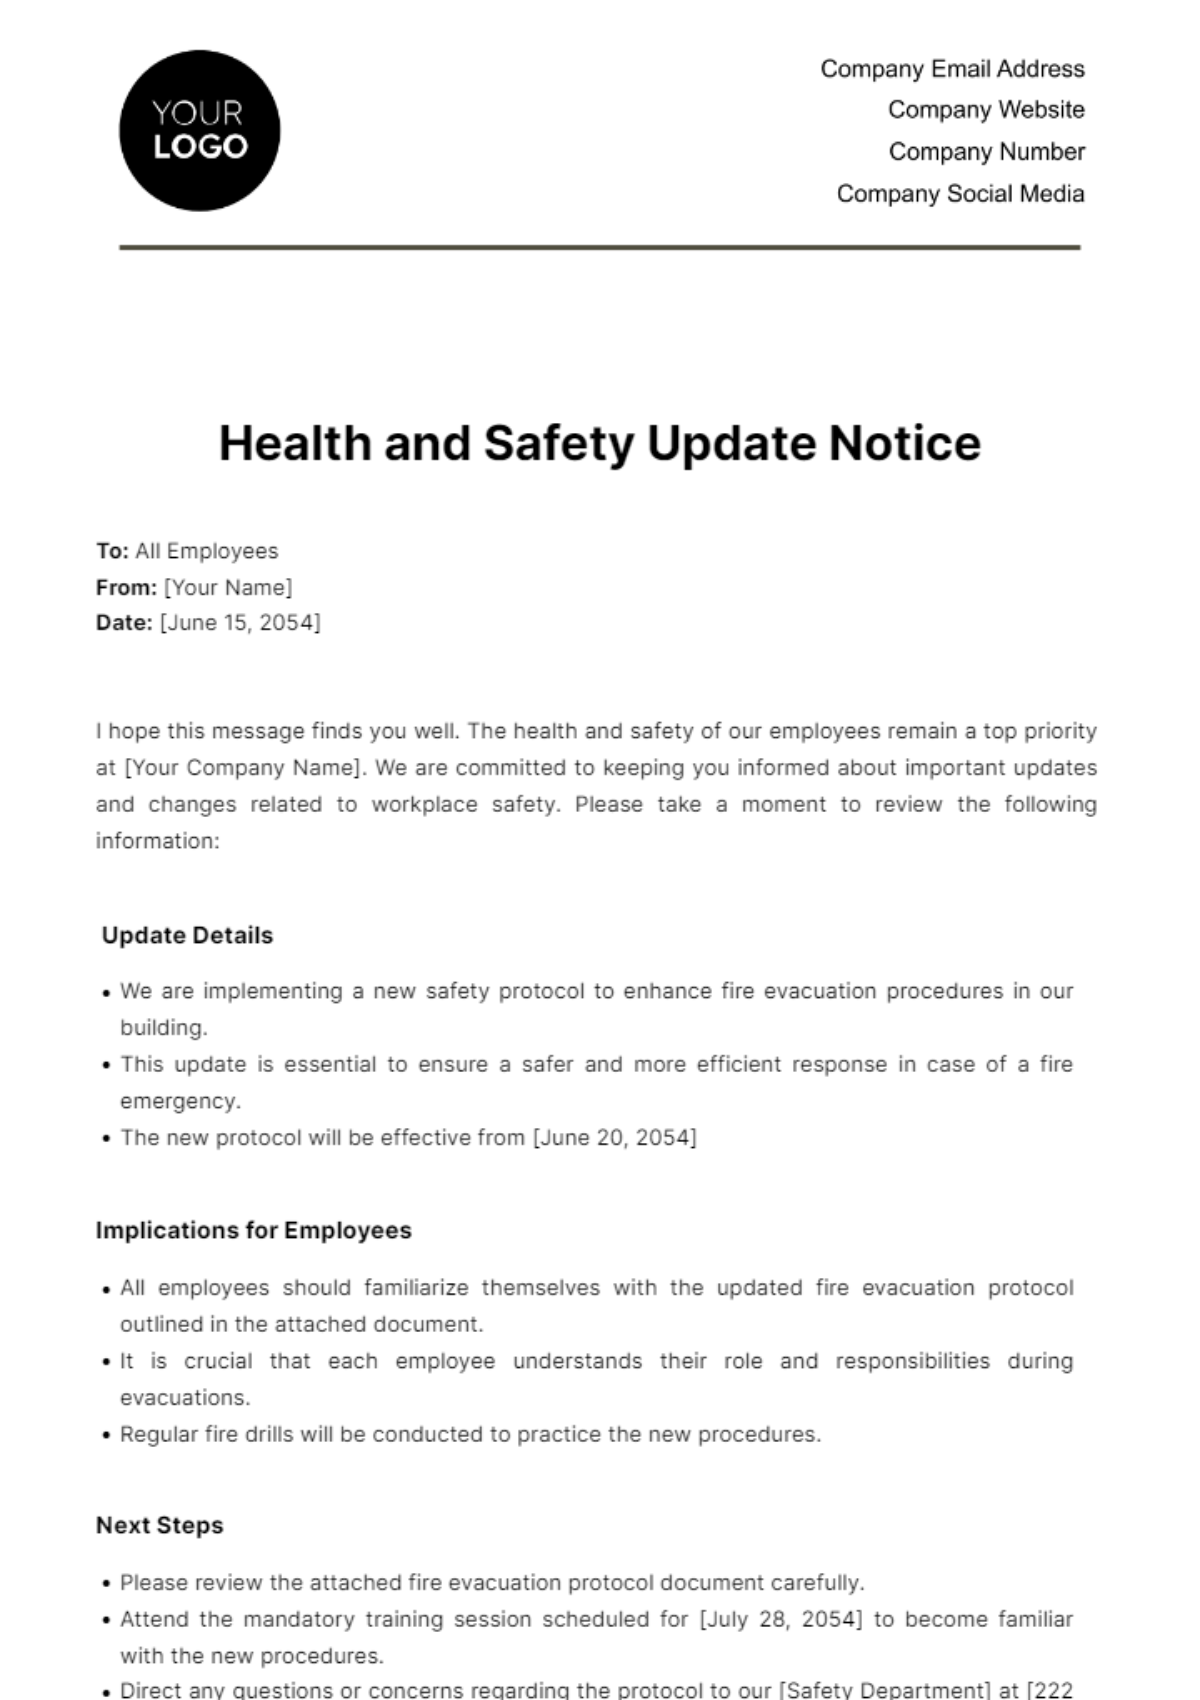 Health and Safety Update Notice HR Template